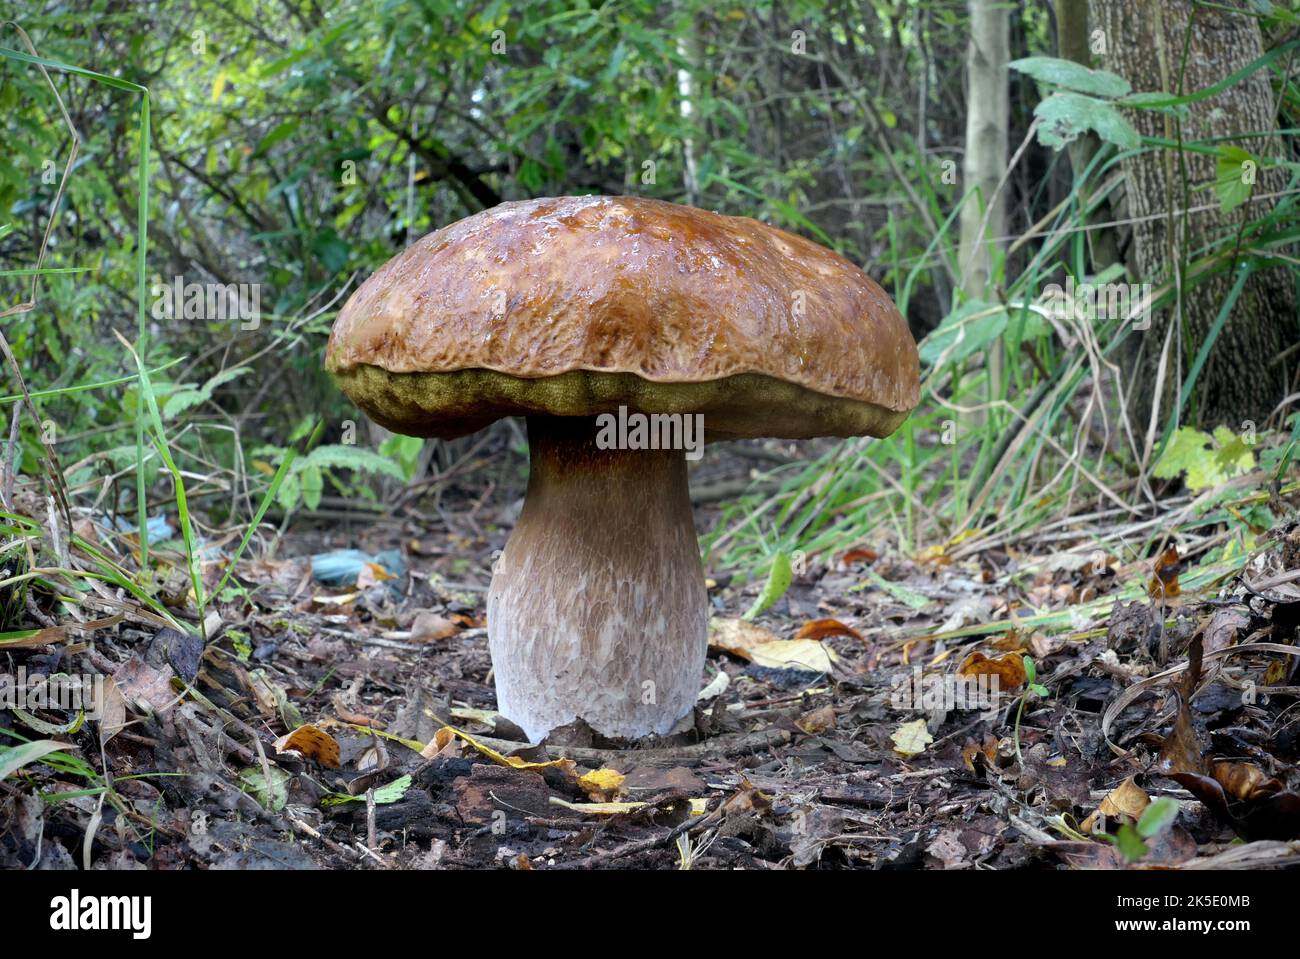 A bolete is a type of mushroom, or fungal fruiting body. It can be identified thanks to a unique mushroom cap. The cap is clearly different from the stem. On the underside of the cap there is usually a spongy surface with pores, instead of the gills typical of mushrooms. However, there are some boletes that are gilled.'Bolete' is the English common name for fungus species whose mushroom caps have this appearance. The boletes are classified in the order Boletales. Not all members of the order Boletales are boletes. ?Credit: BSpragg Stock Photo